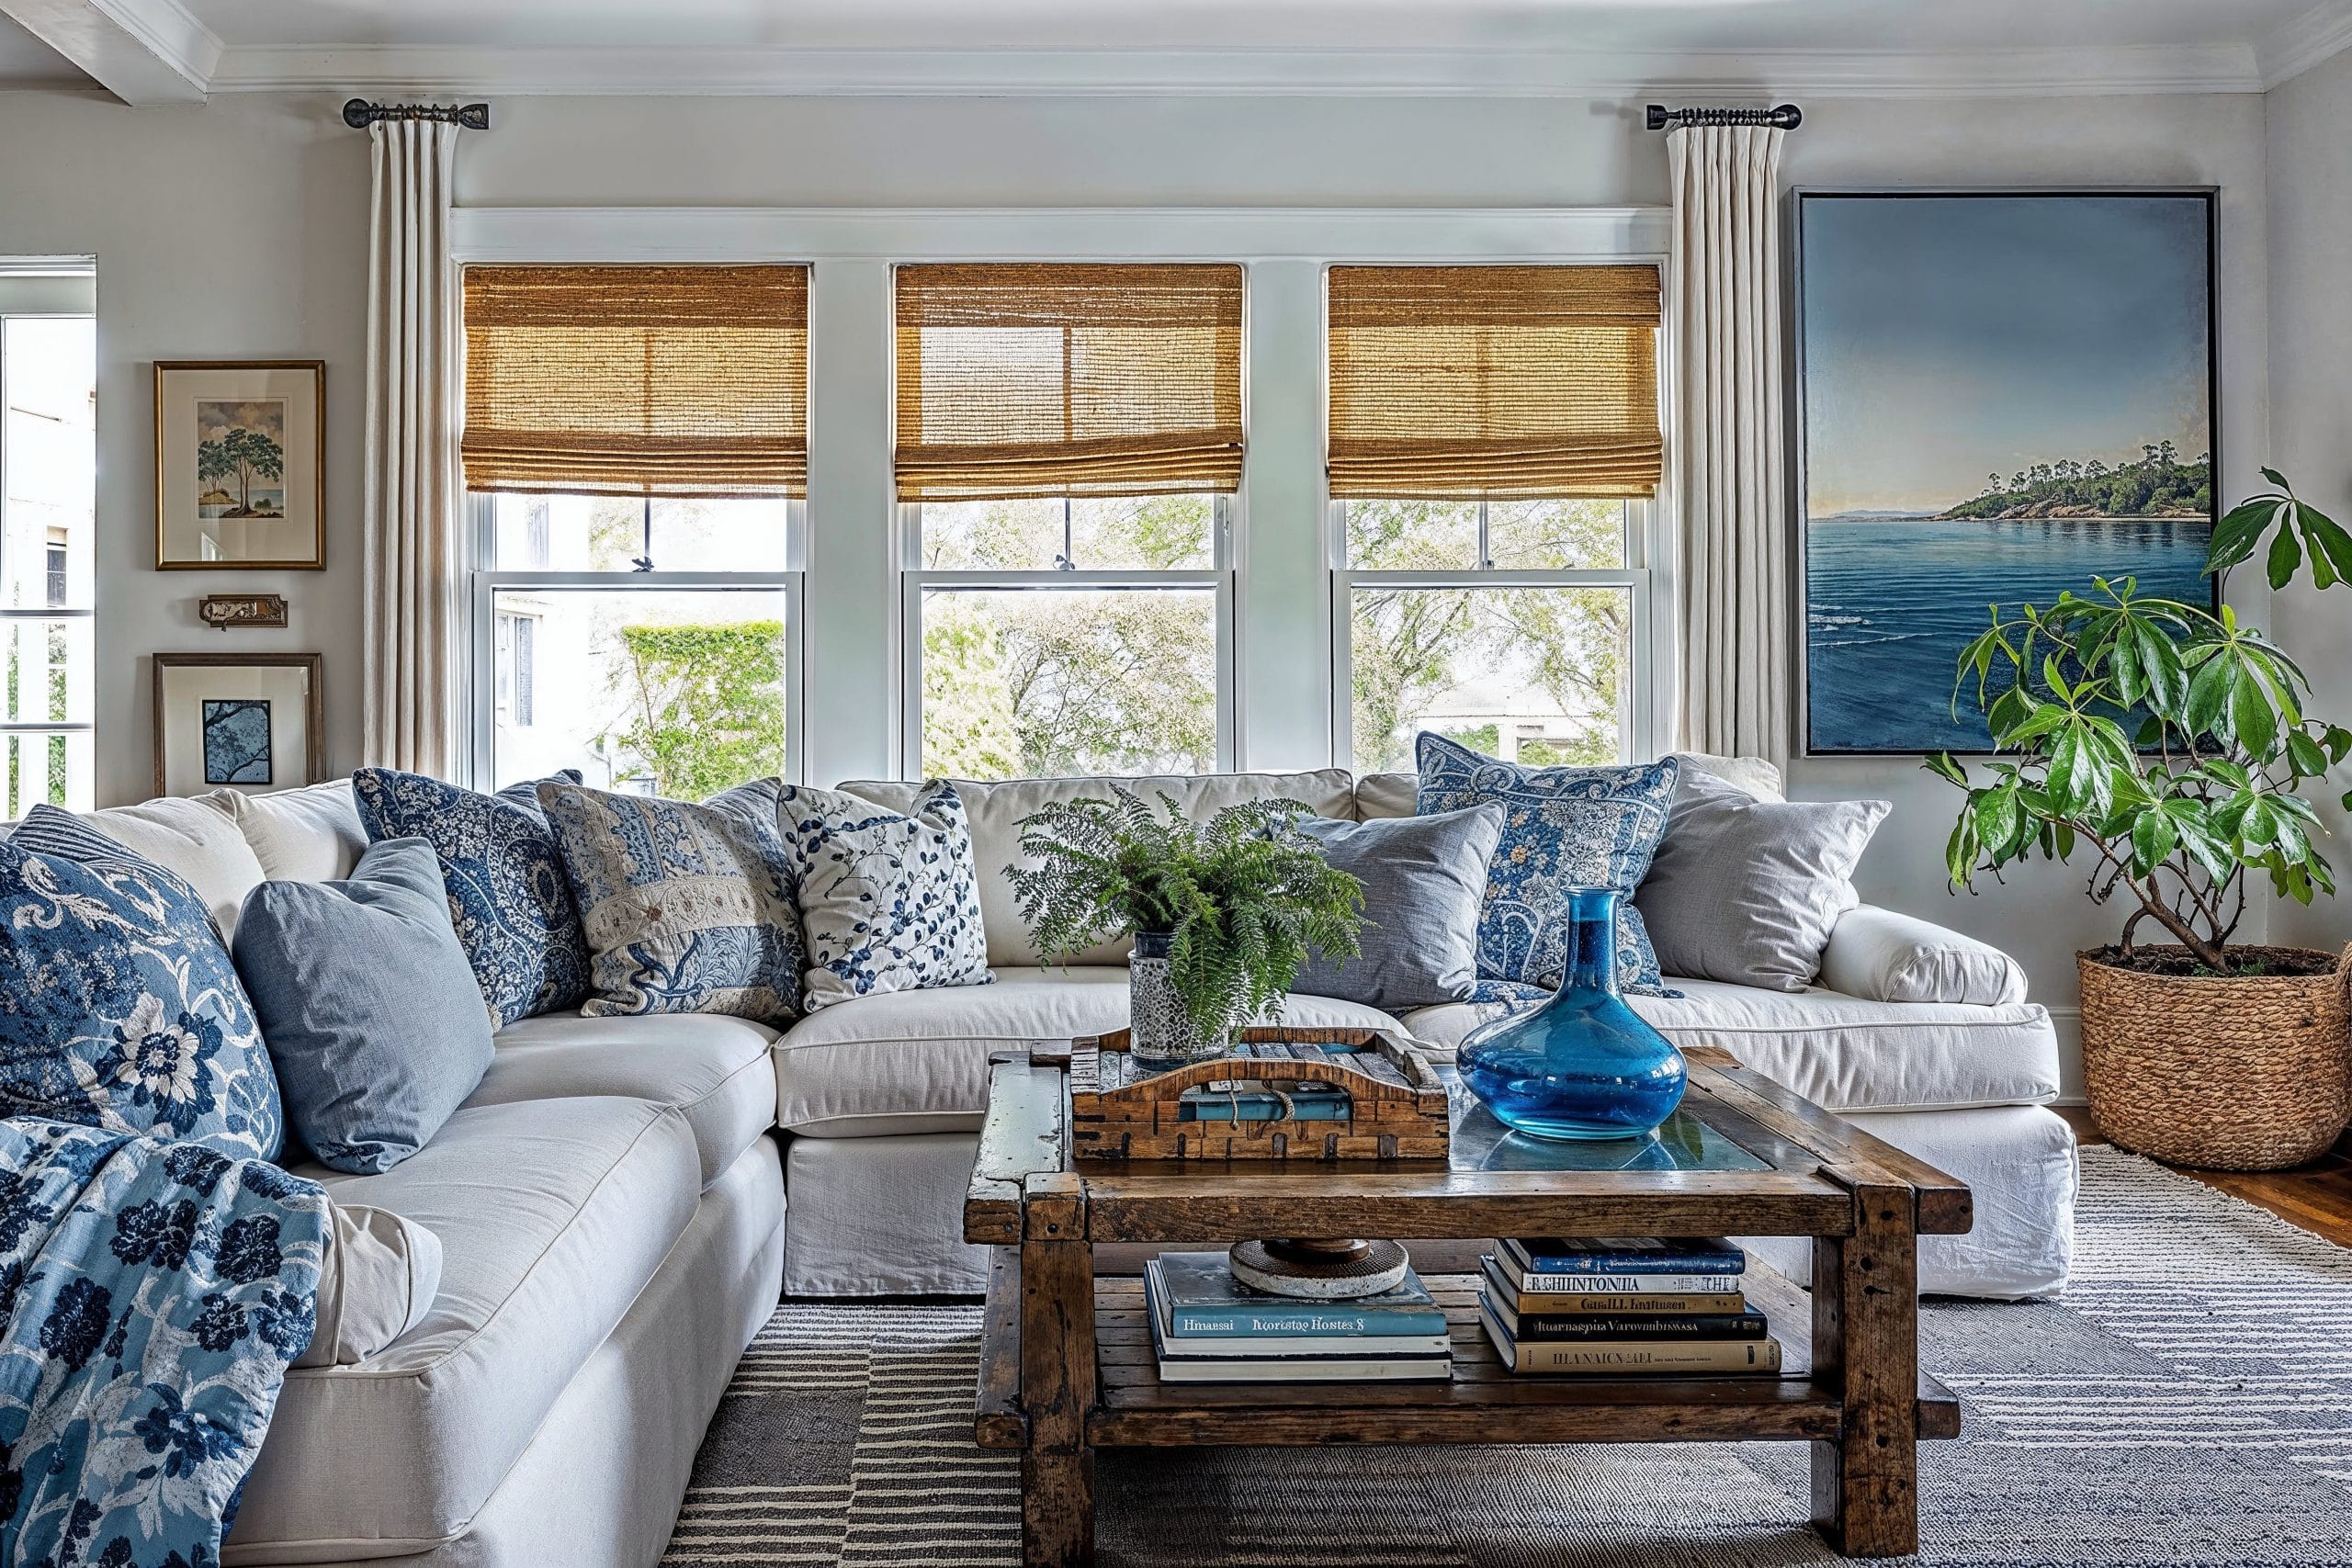 Cape Cod House Interiors: How to Get the Charming Look